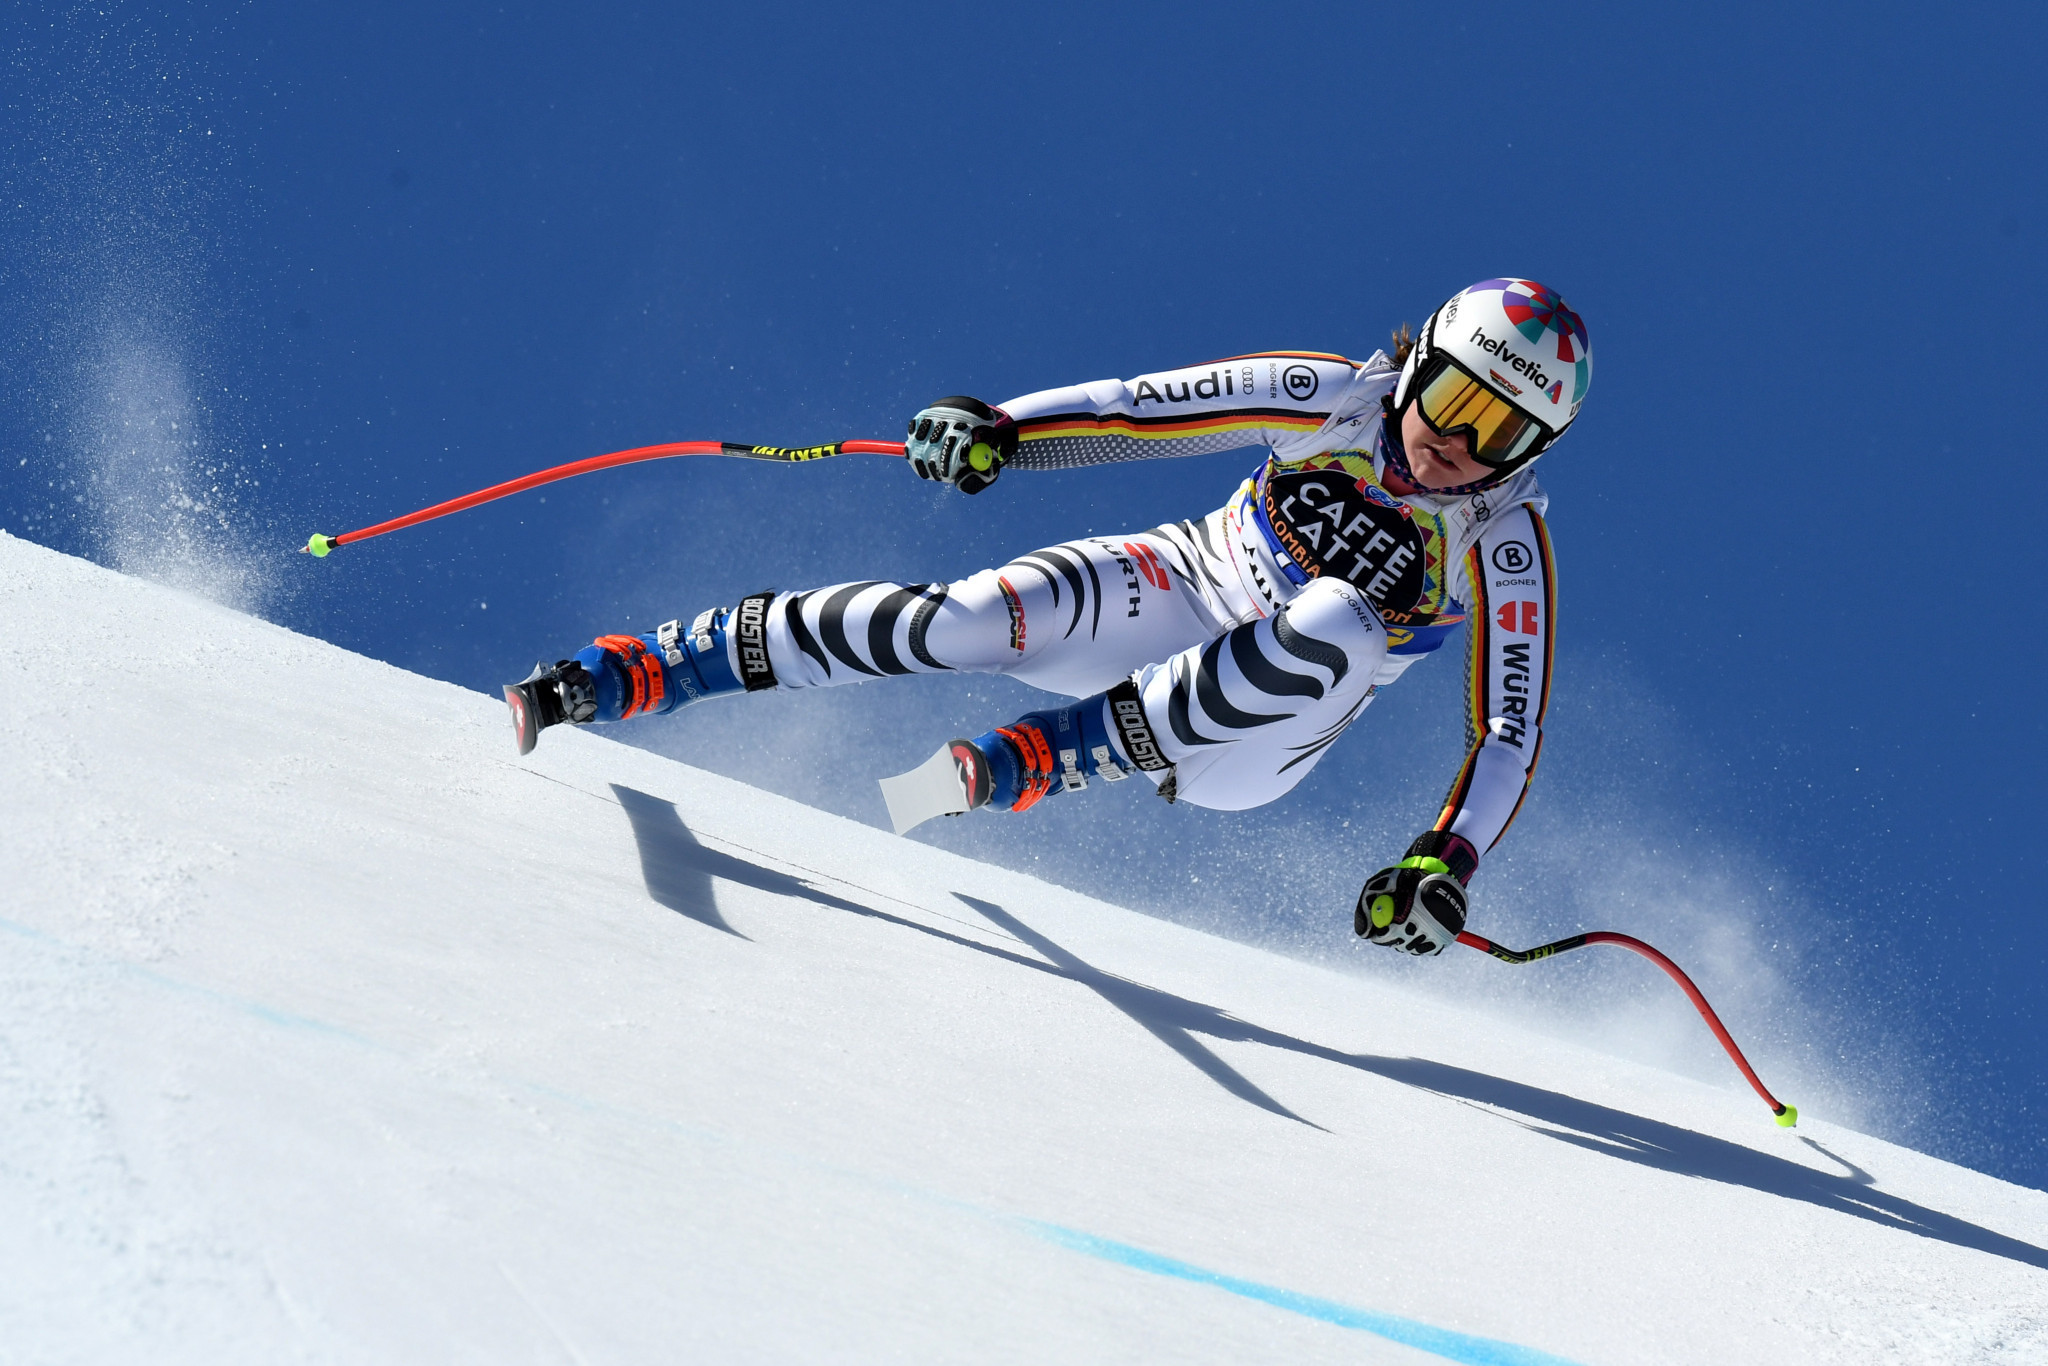 Potential third FIS Alpine World Ski Championships in Olympic cycle to be discussed